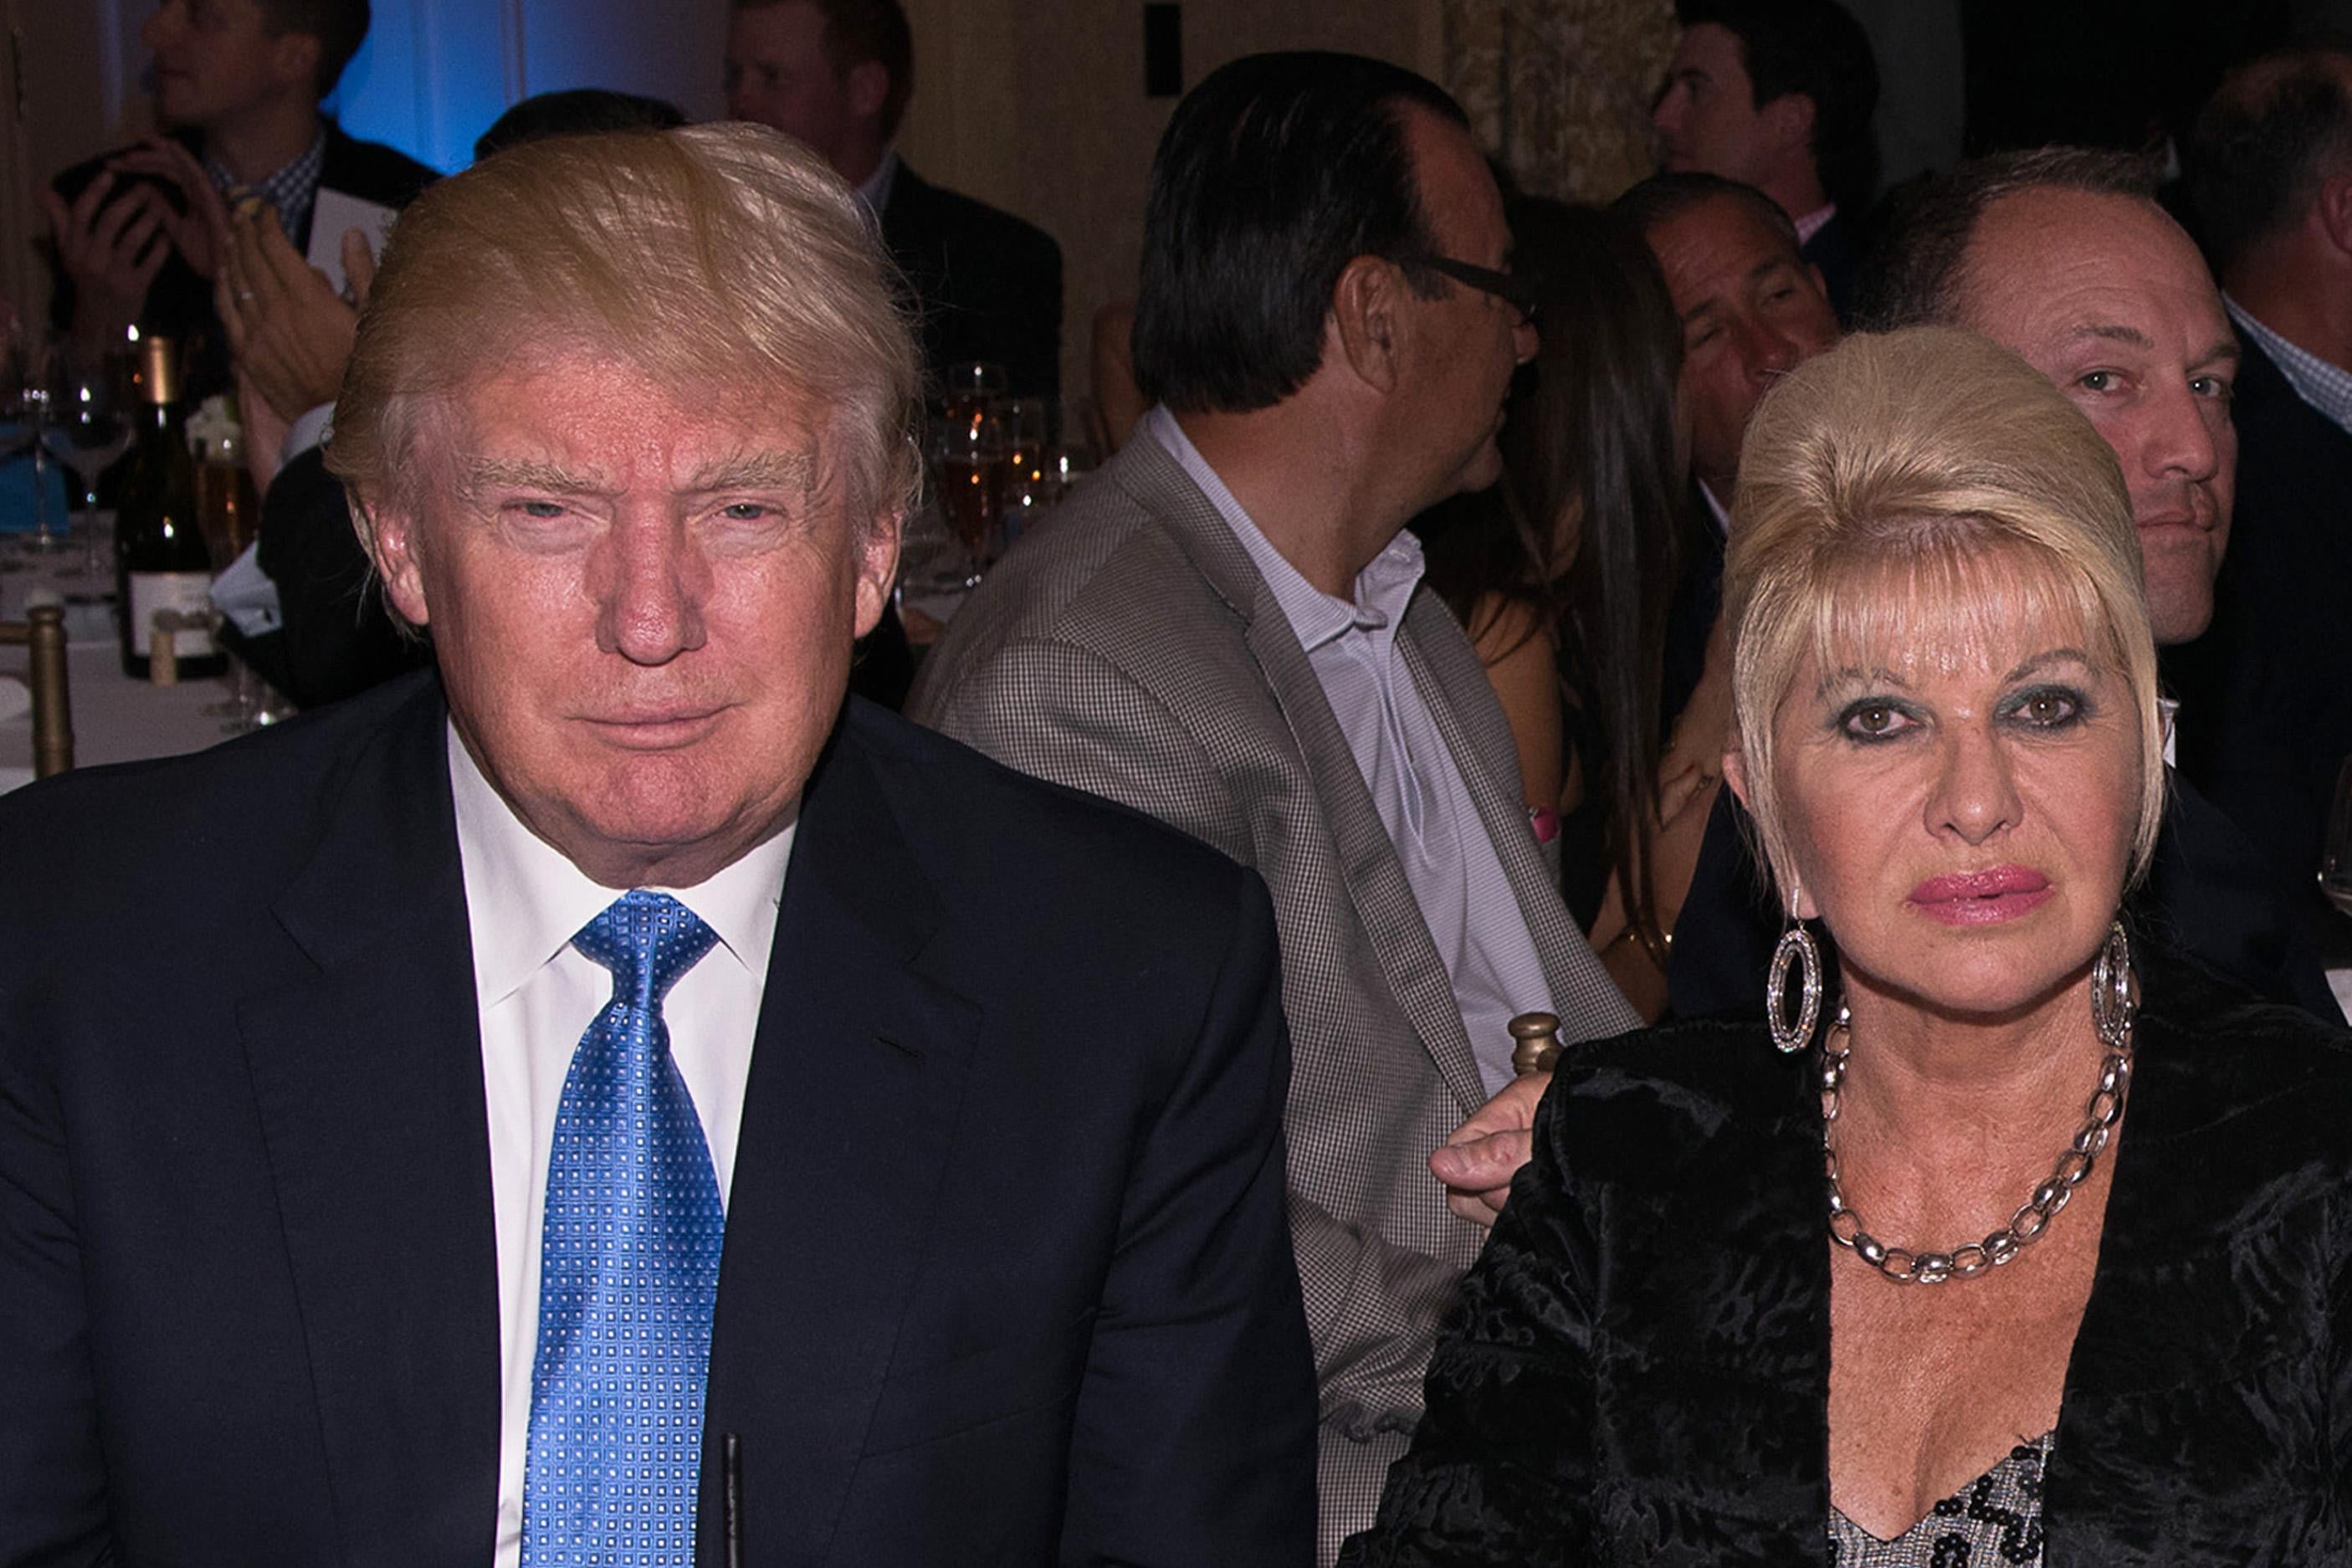 A photo of Donald Trump and Ivana Trump, sitting next to each other, in 2014 at the Eric Trump 8th Annual Golf Tournament at Trump National Golf Club in New York.